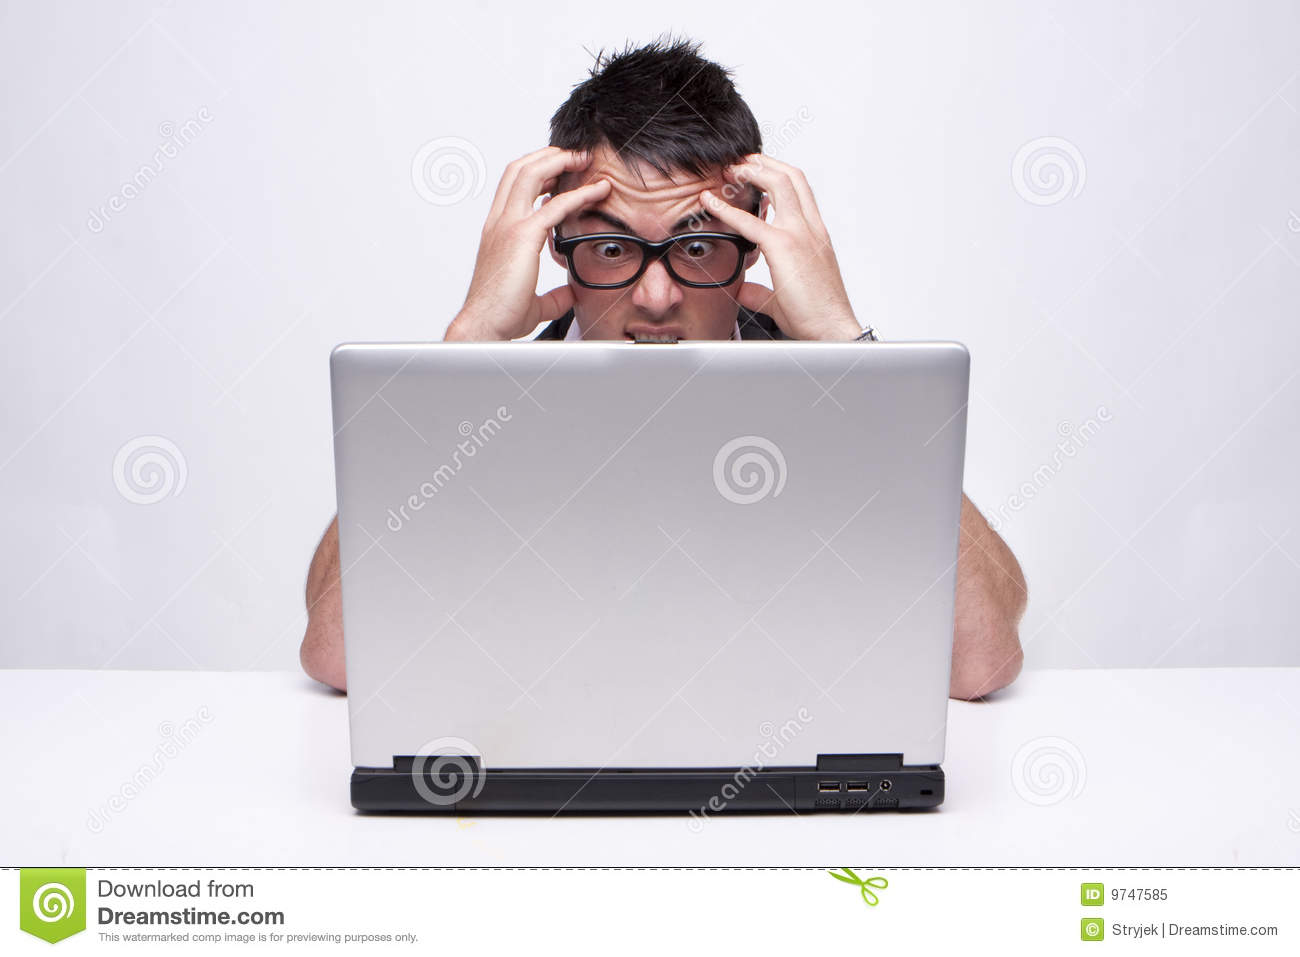 Computer Problems Royalty Free Stock Photo   Image  9747585